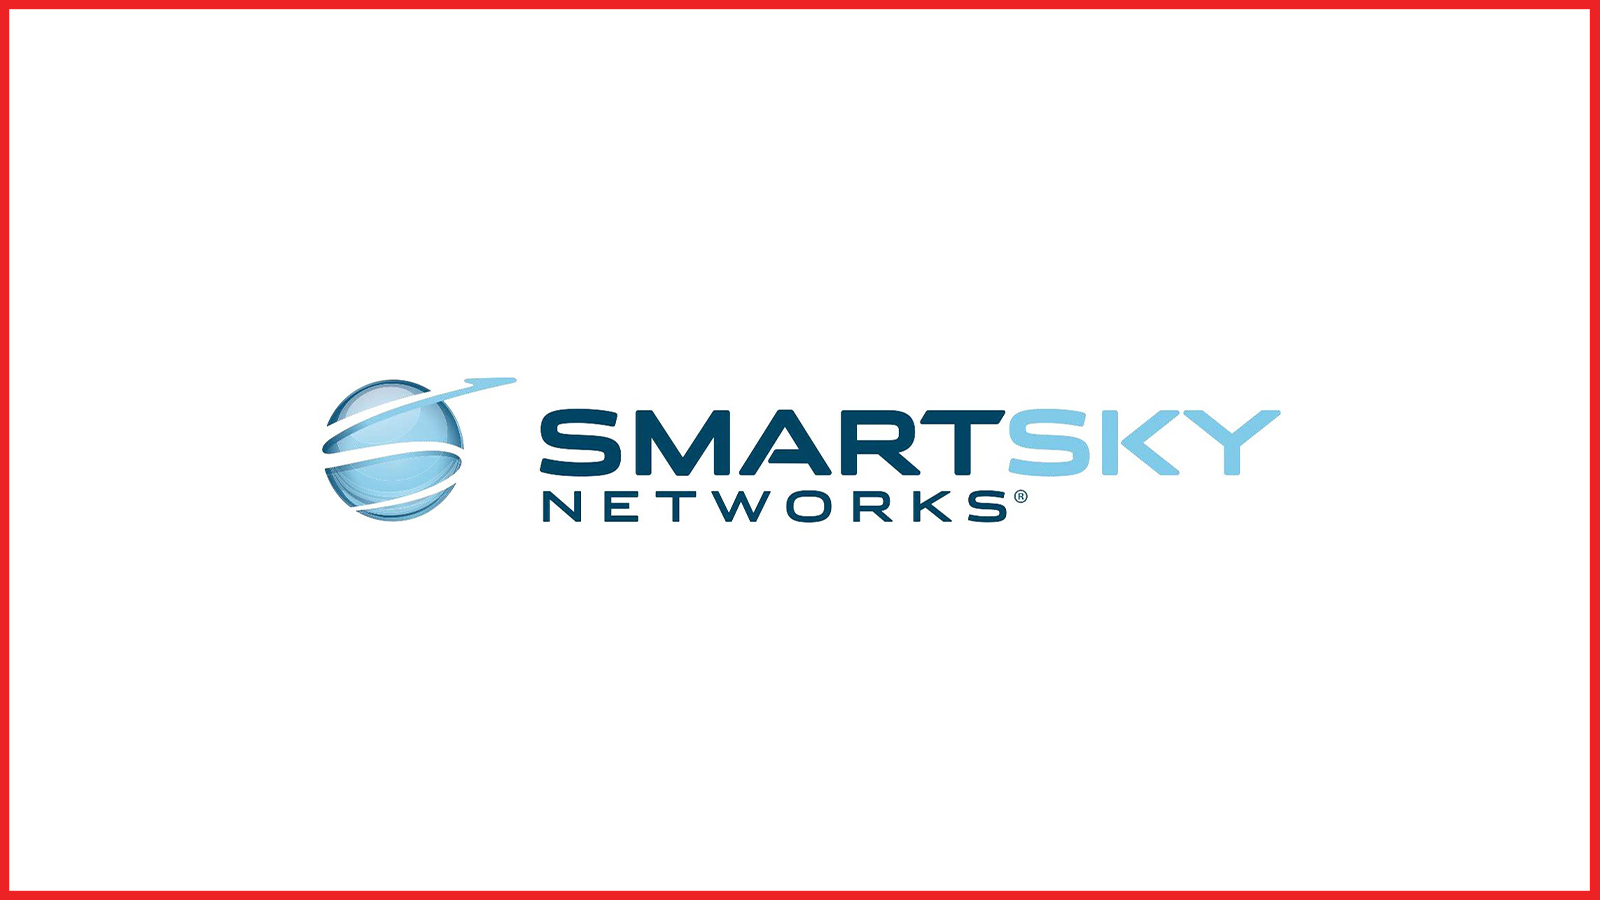 smartsky networks logo with a red border